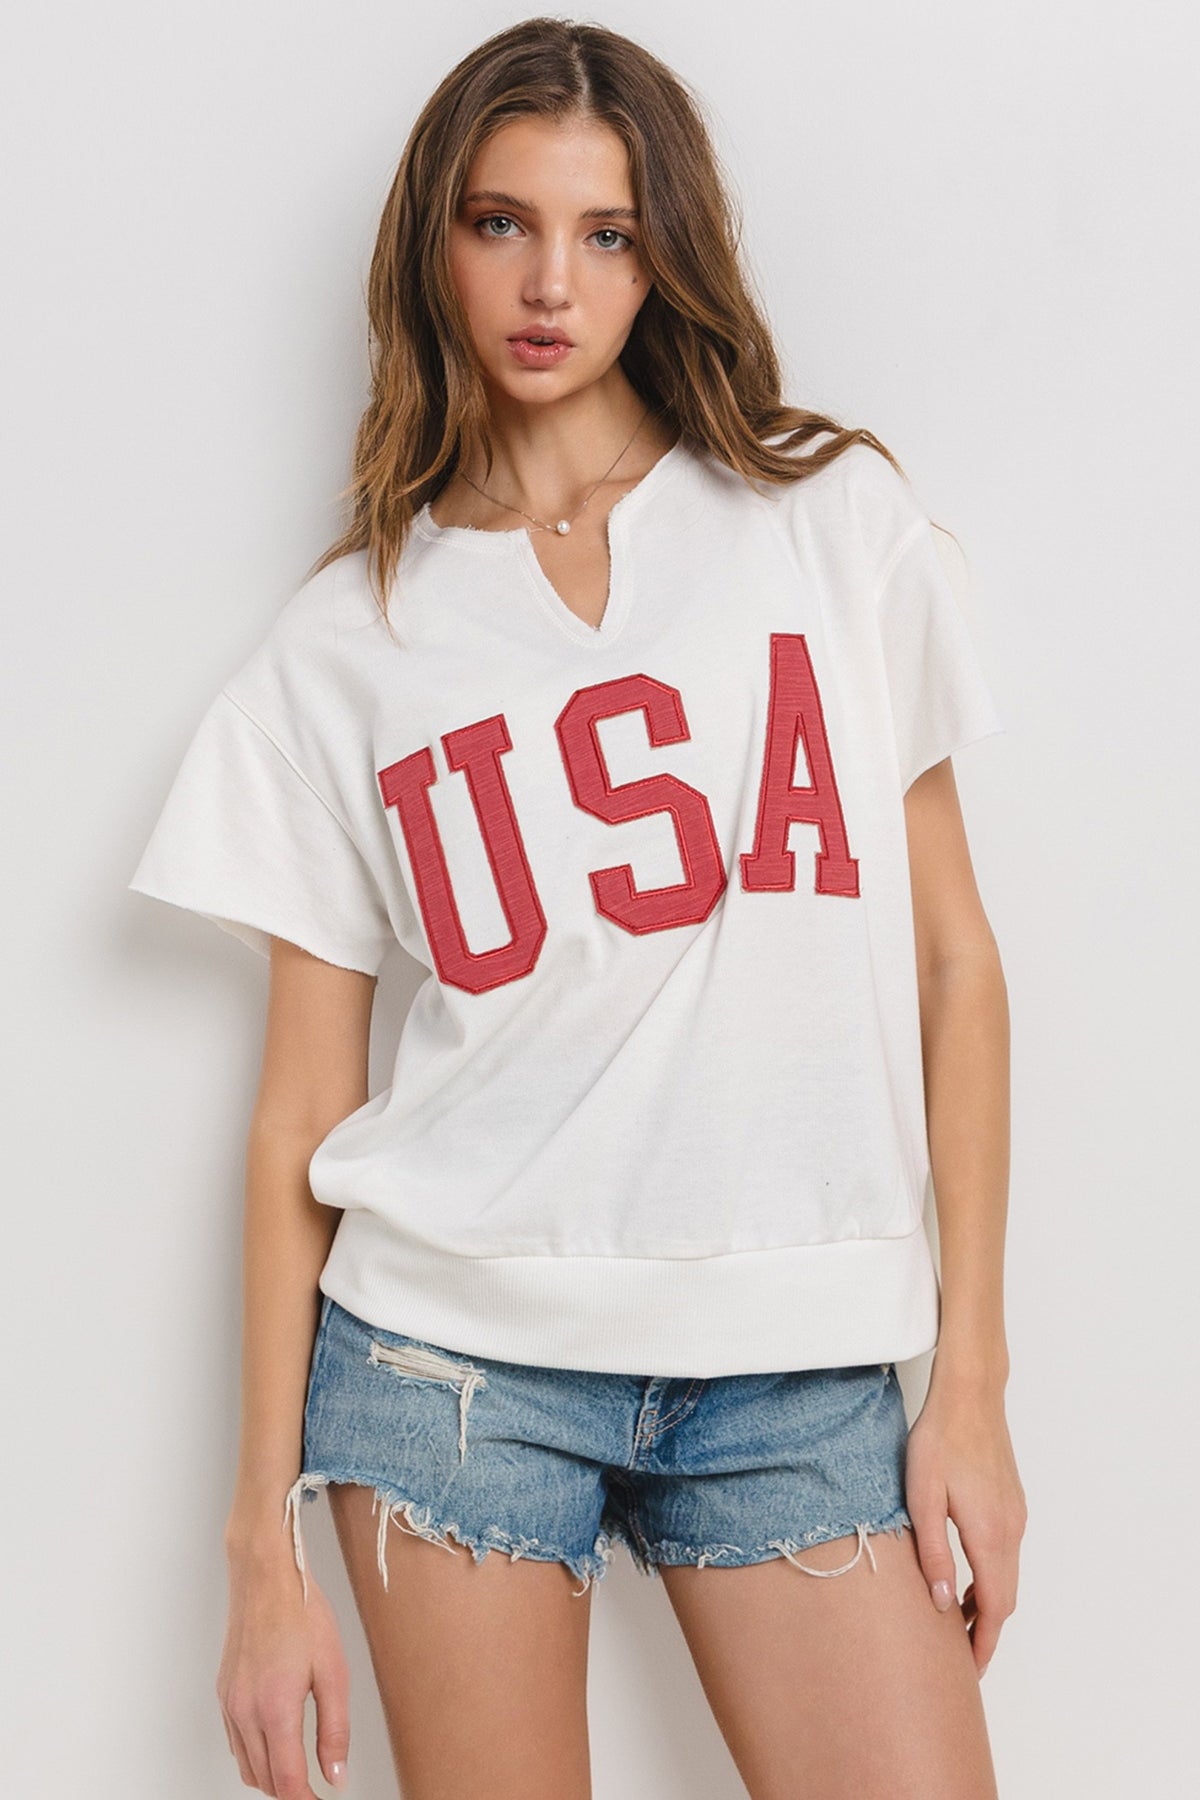 usa t-shirt in white-front view